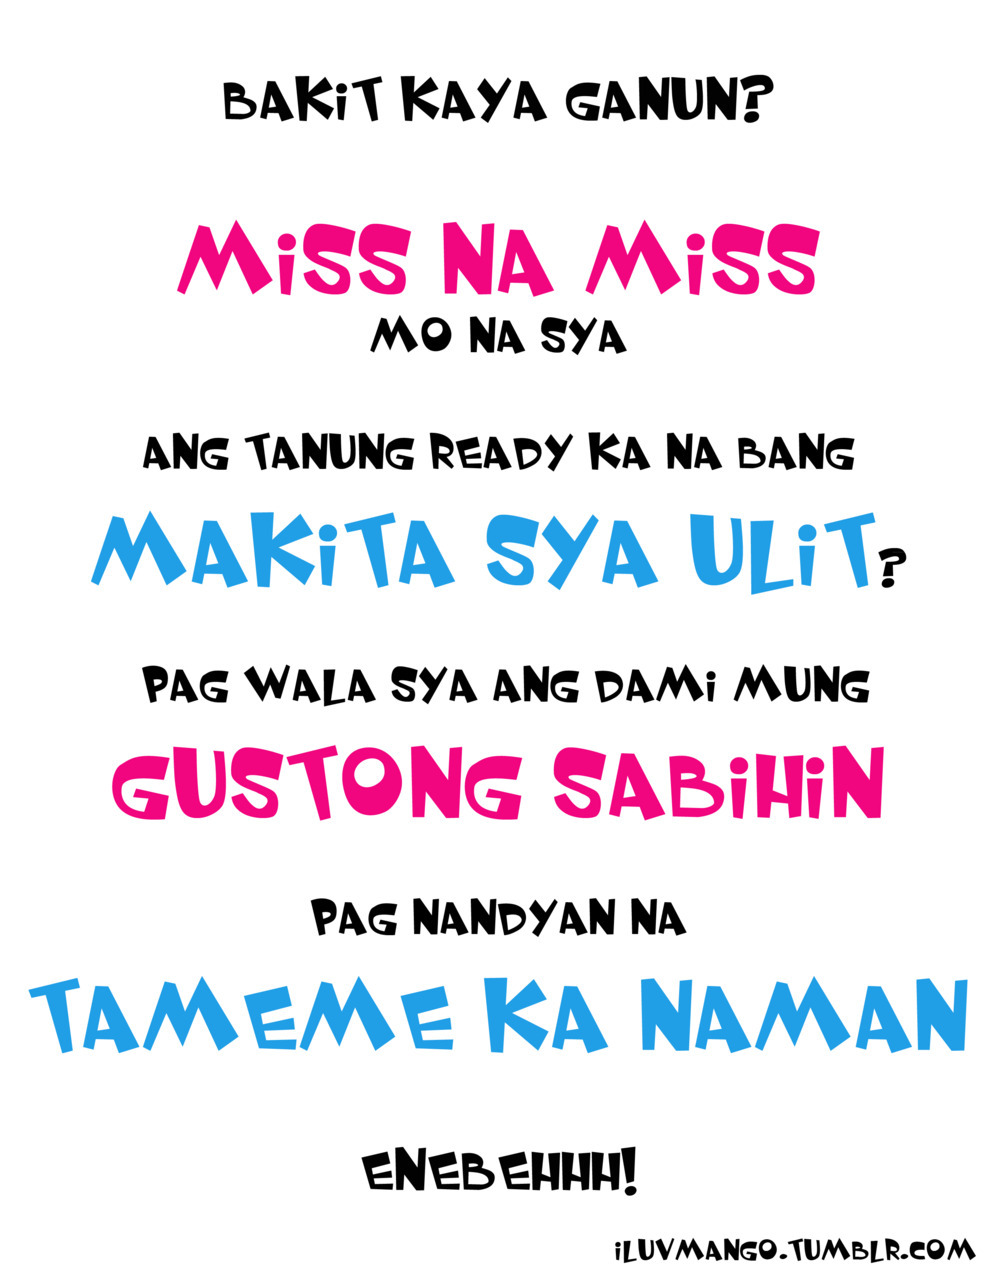 ... quotes # tagalo # tagalog love quotes # quotes # love quotes # quotes